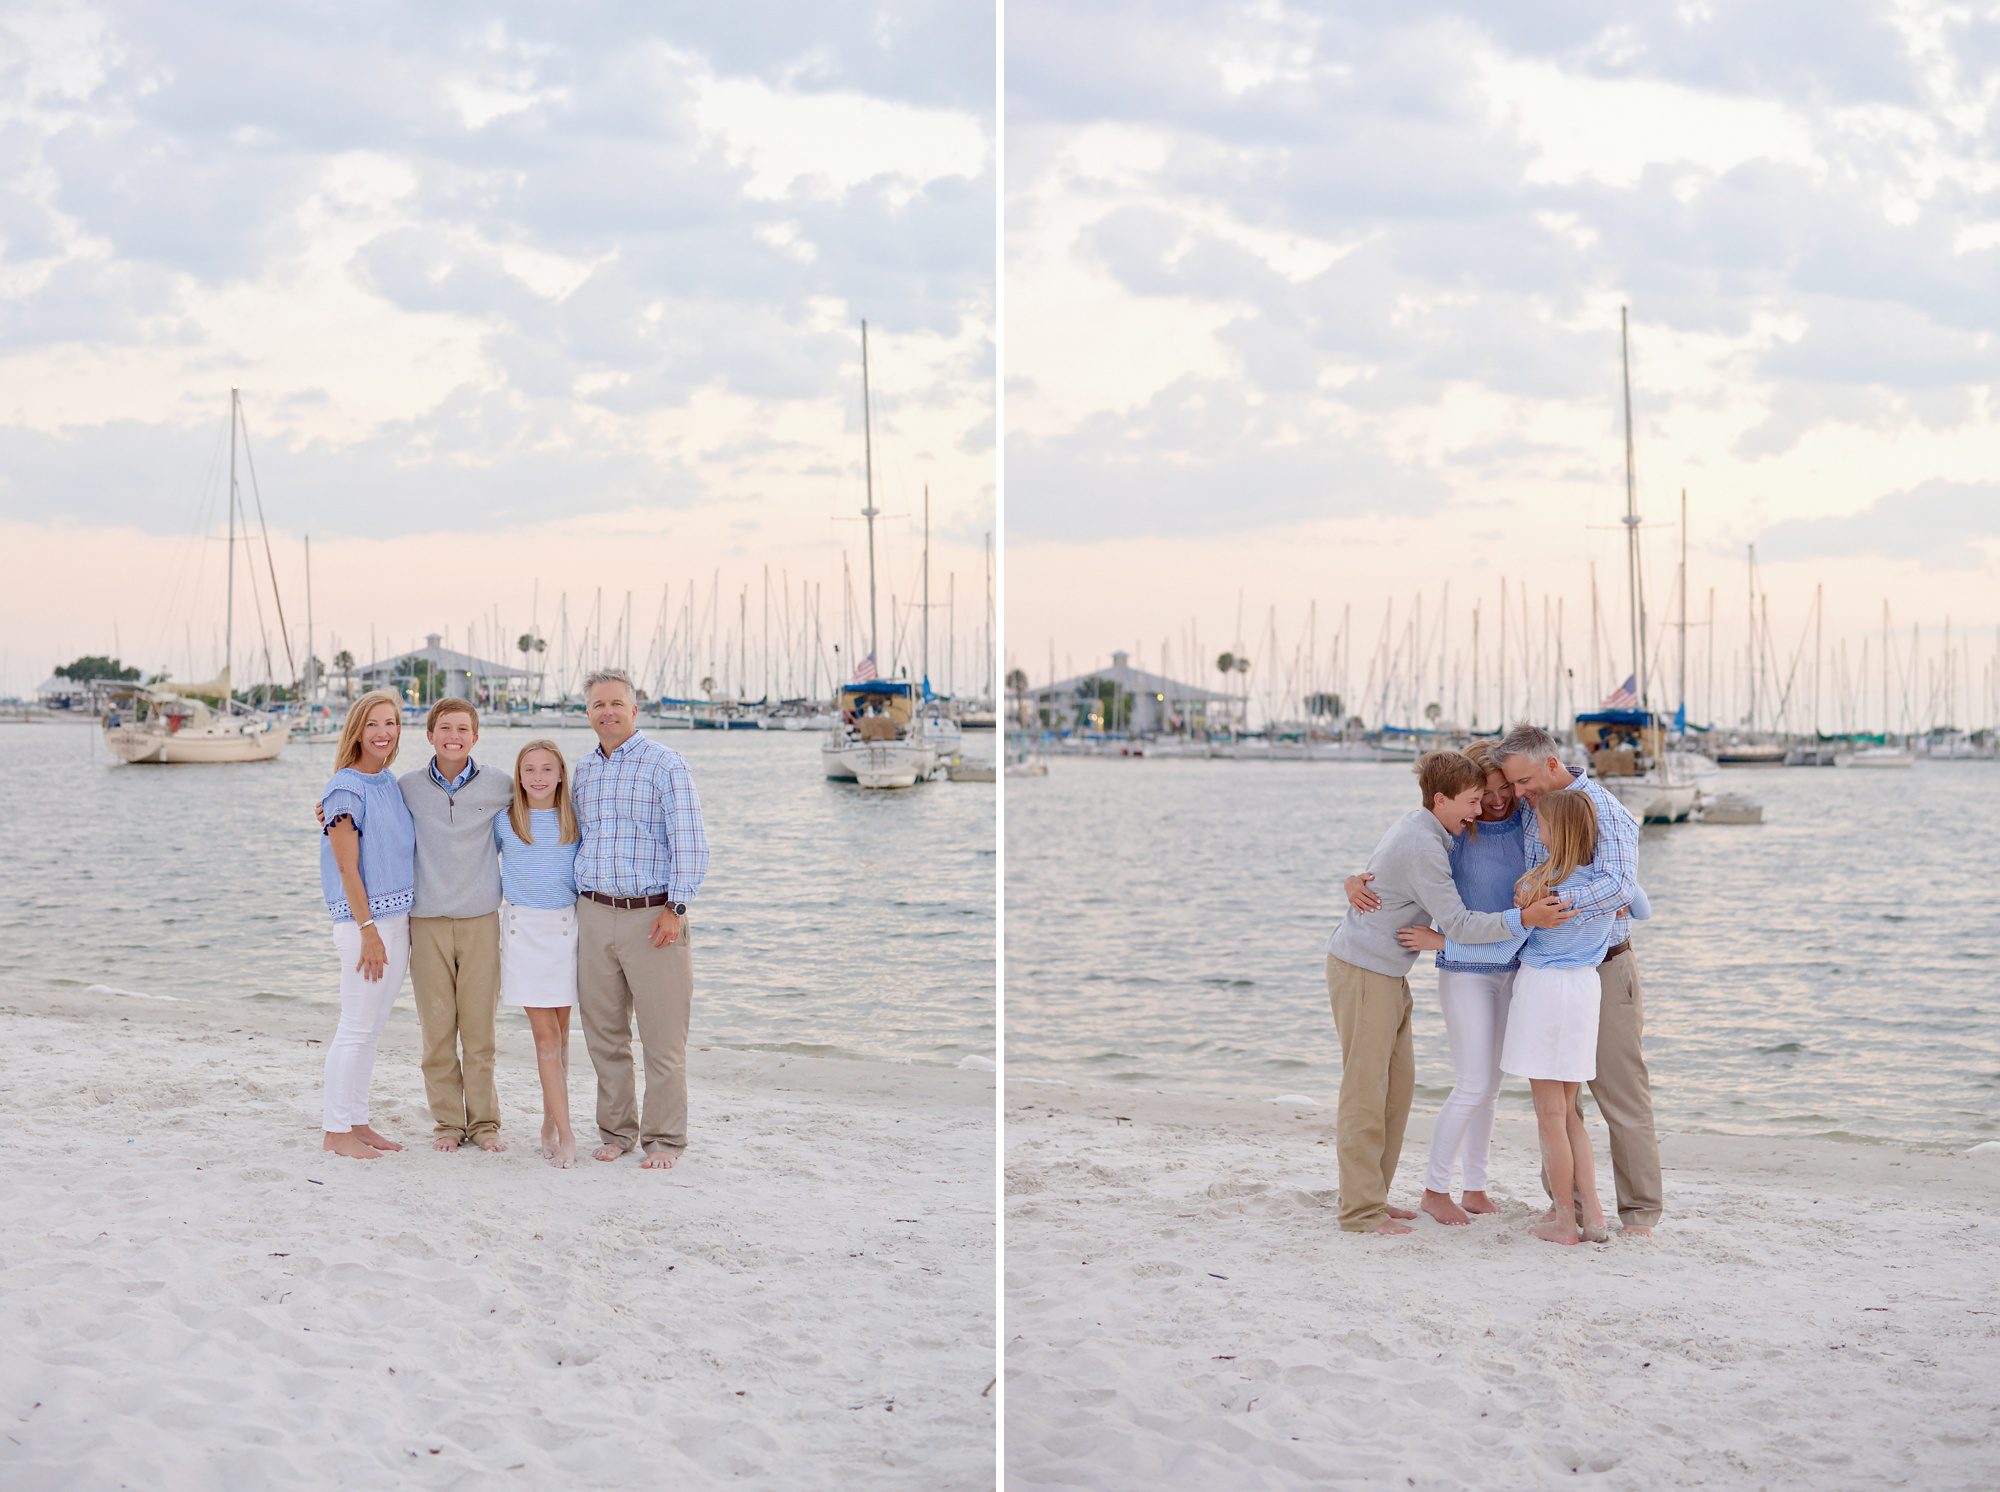 An adorable family of 4 with 2 kids in the early teen years get fun family portraits at a small beach in Tampa, FL with sailboats in the background.